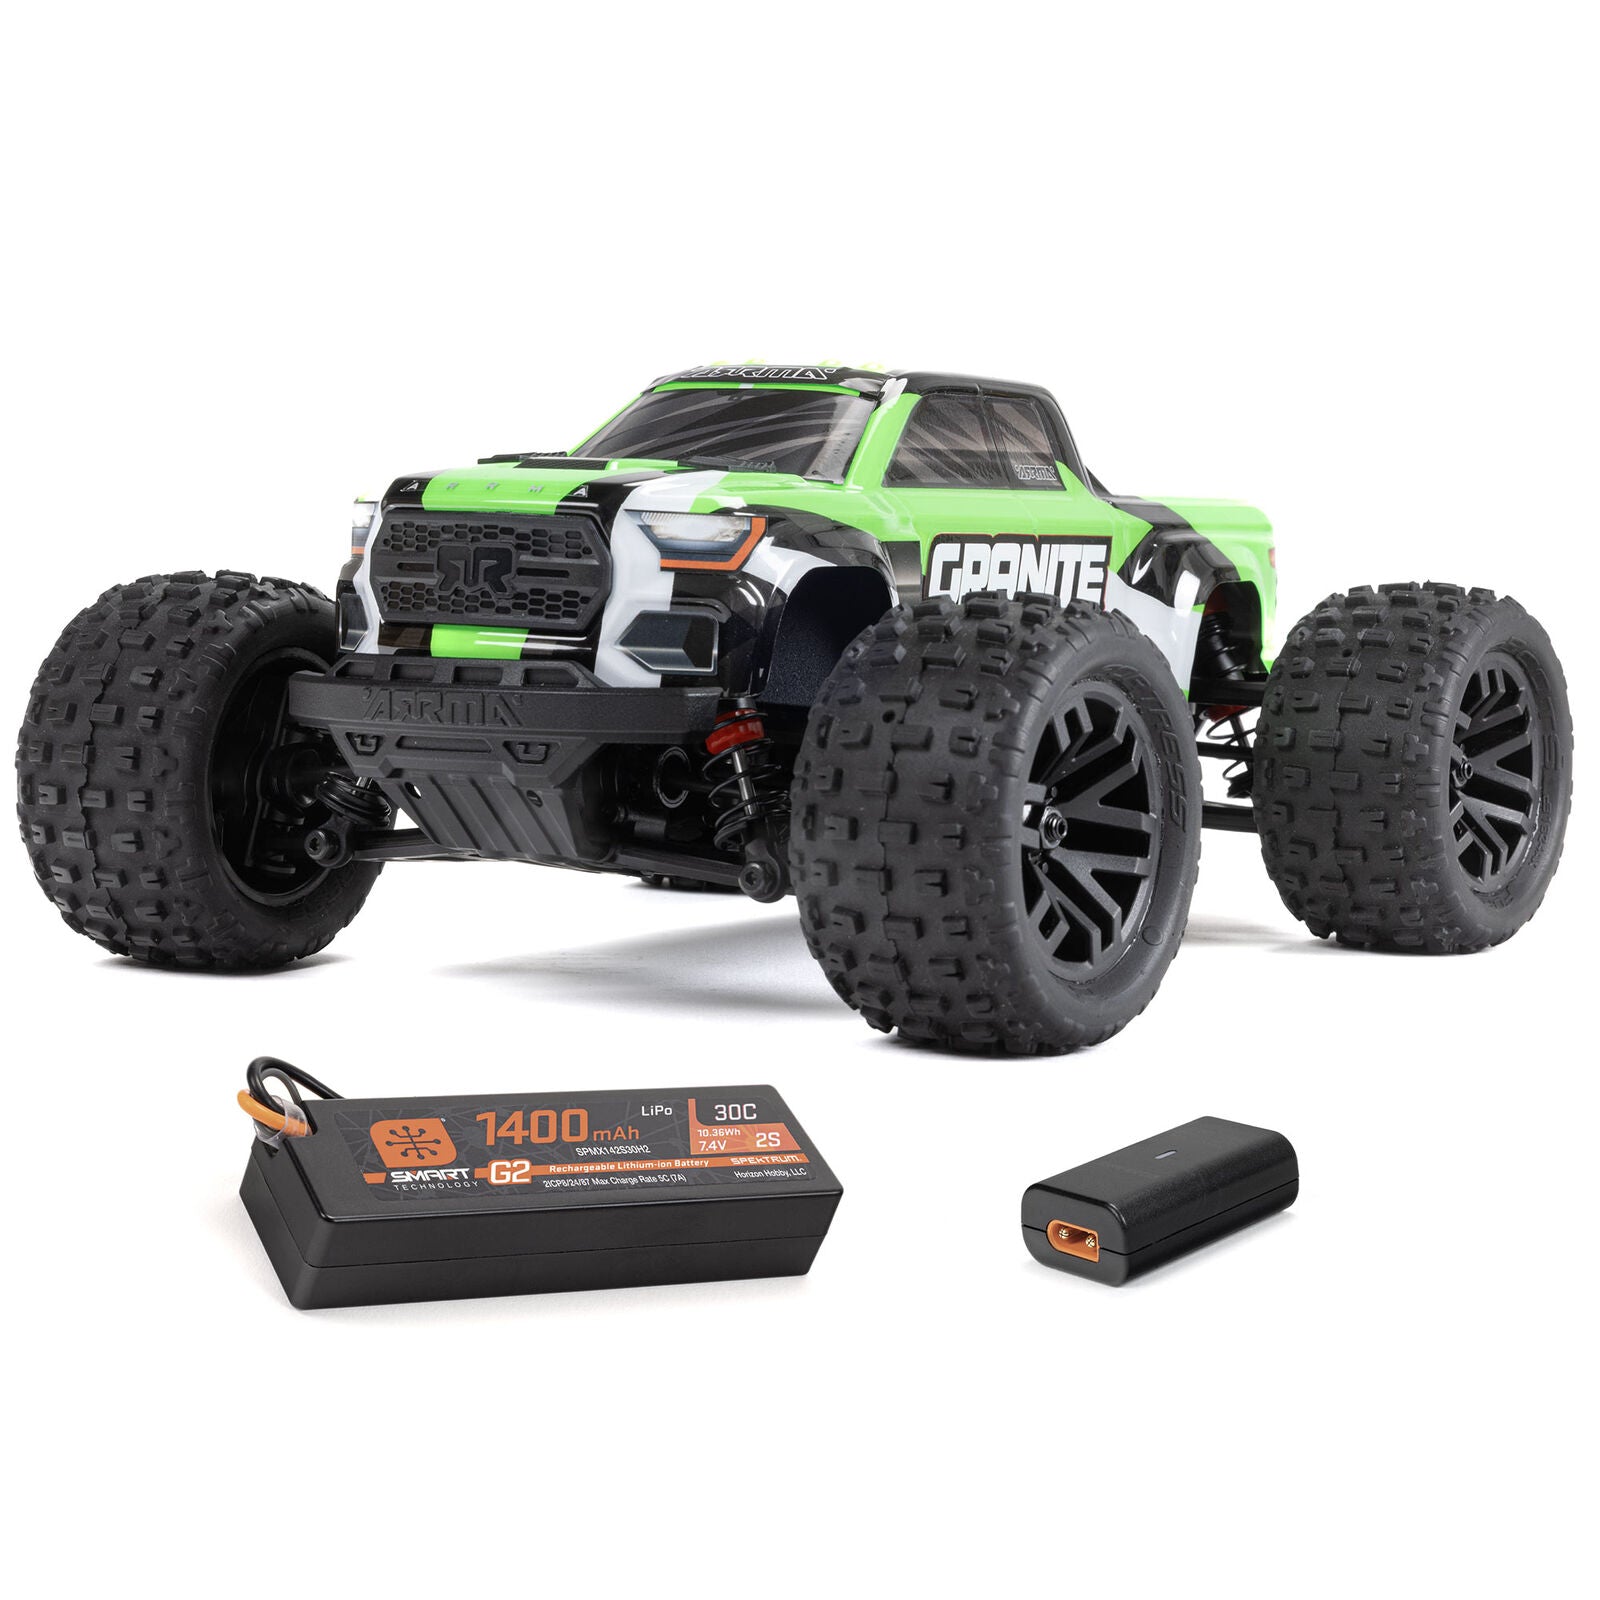 ARRMA ARA2102T3 1/18 GRANITE GROM MEGA 380 Brushed 4X4 Monster Truck RTR with Battery & Charger, Green